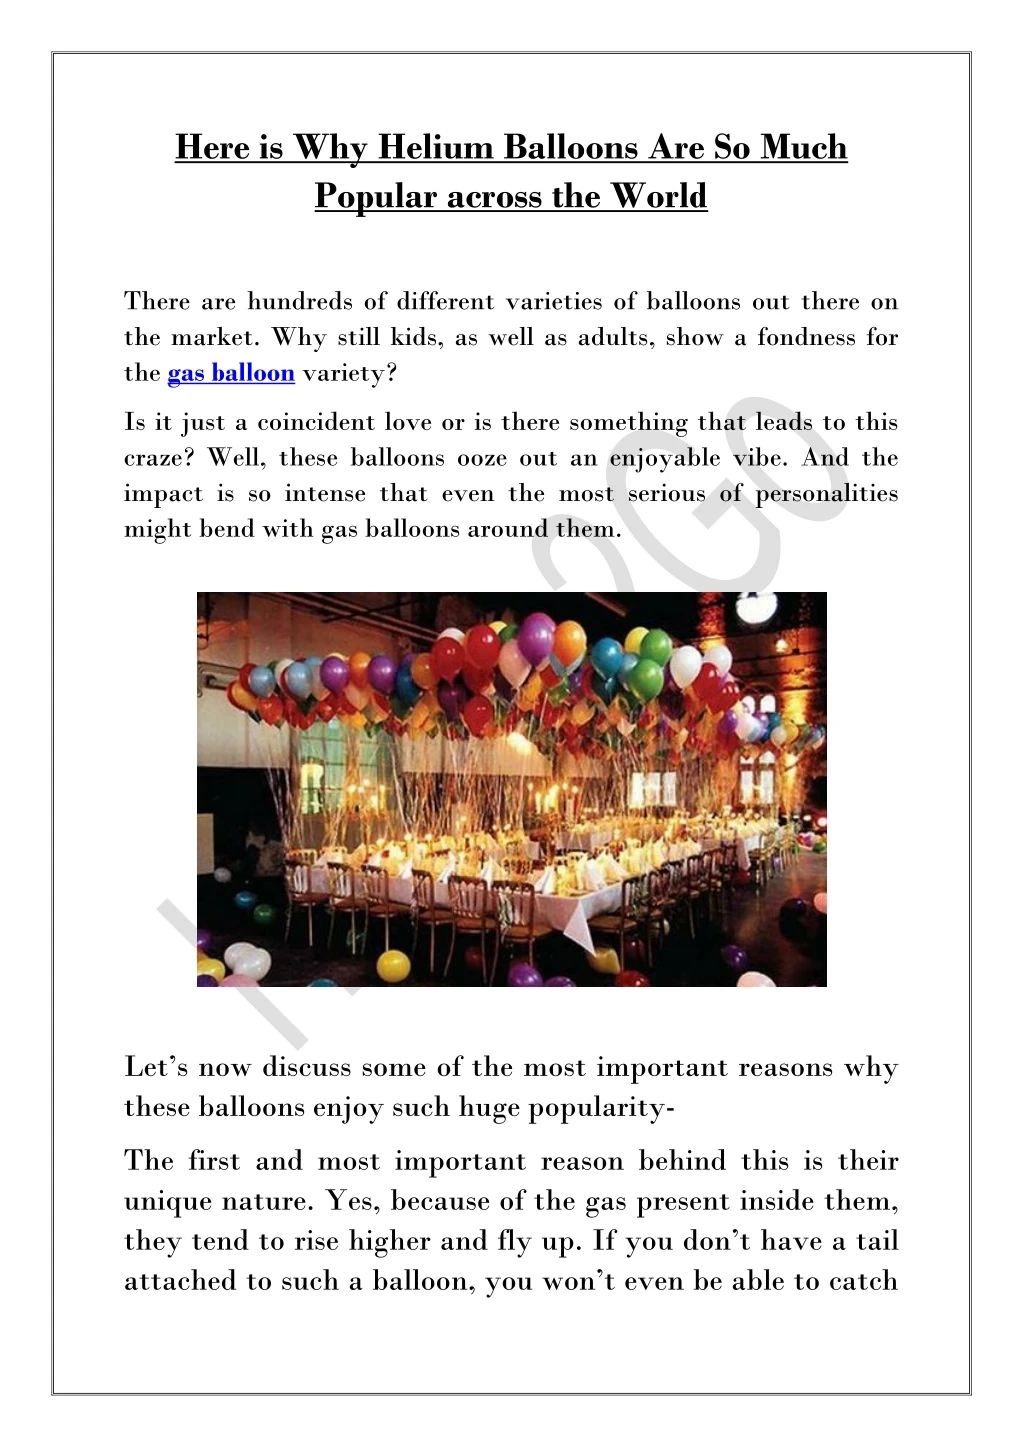 here is why helium balloons are so much popular